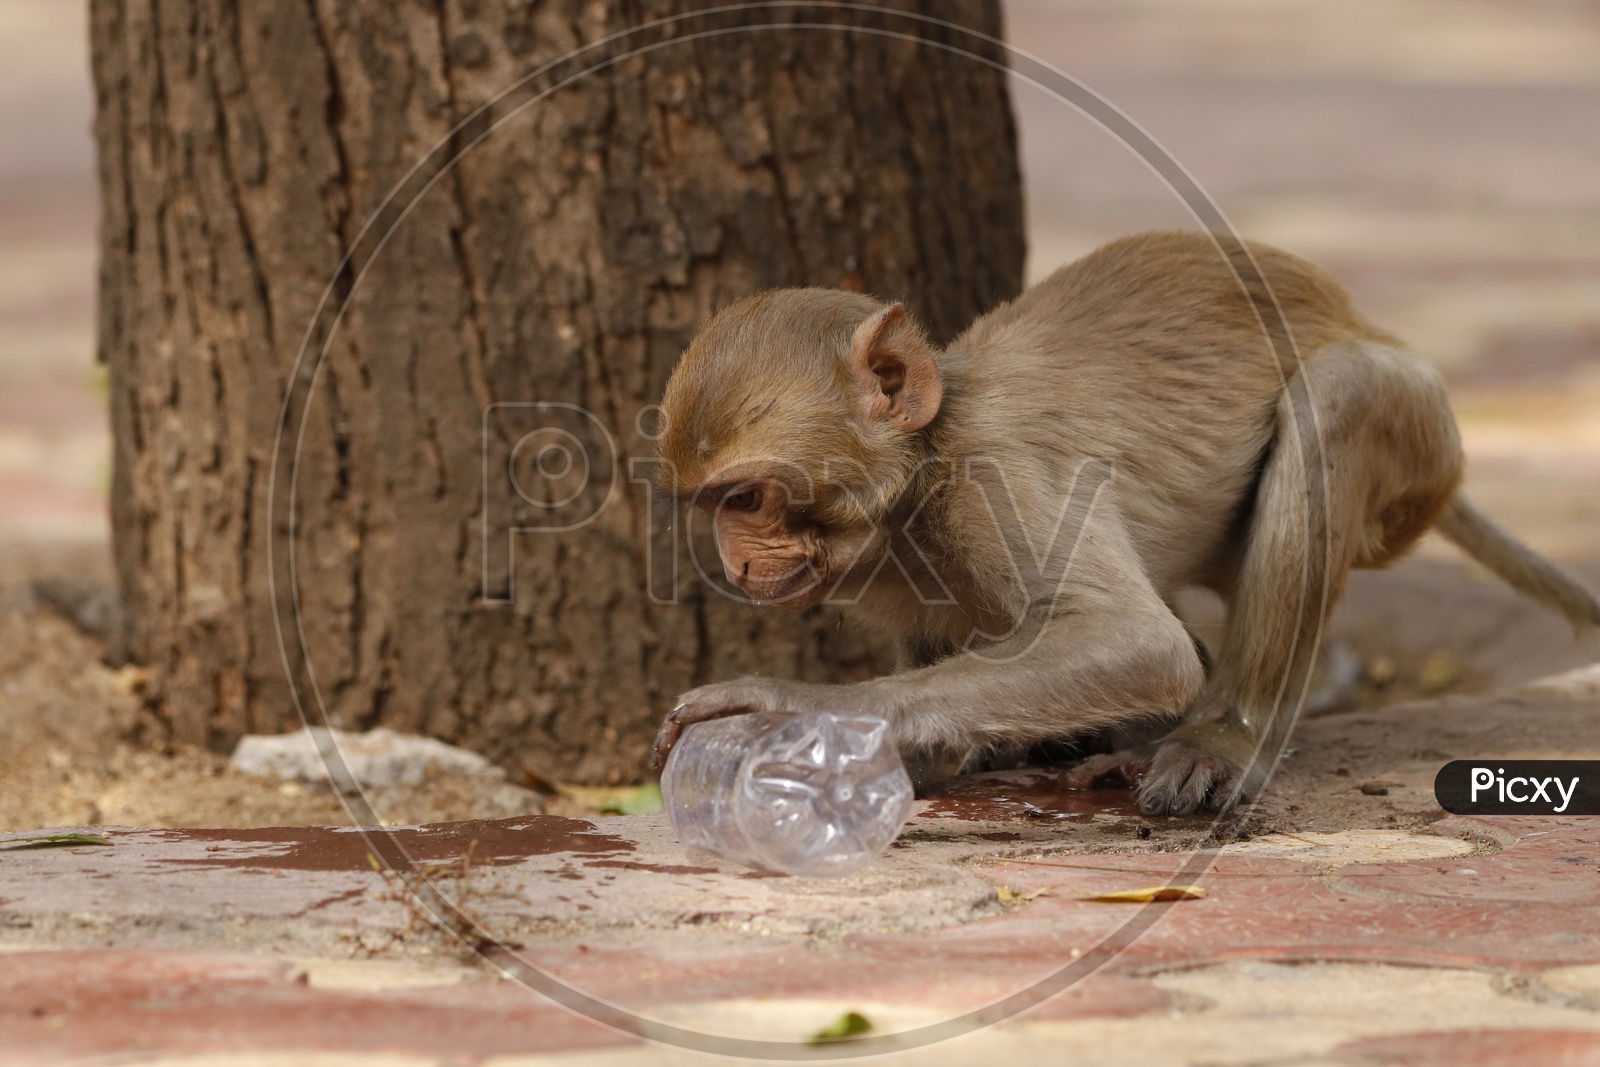 A monkey with plastic water bottle